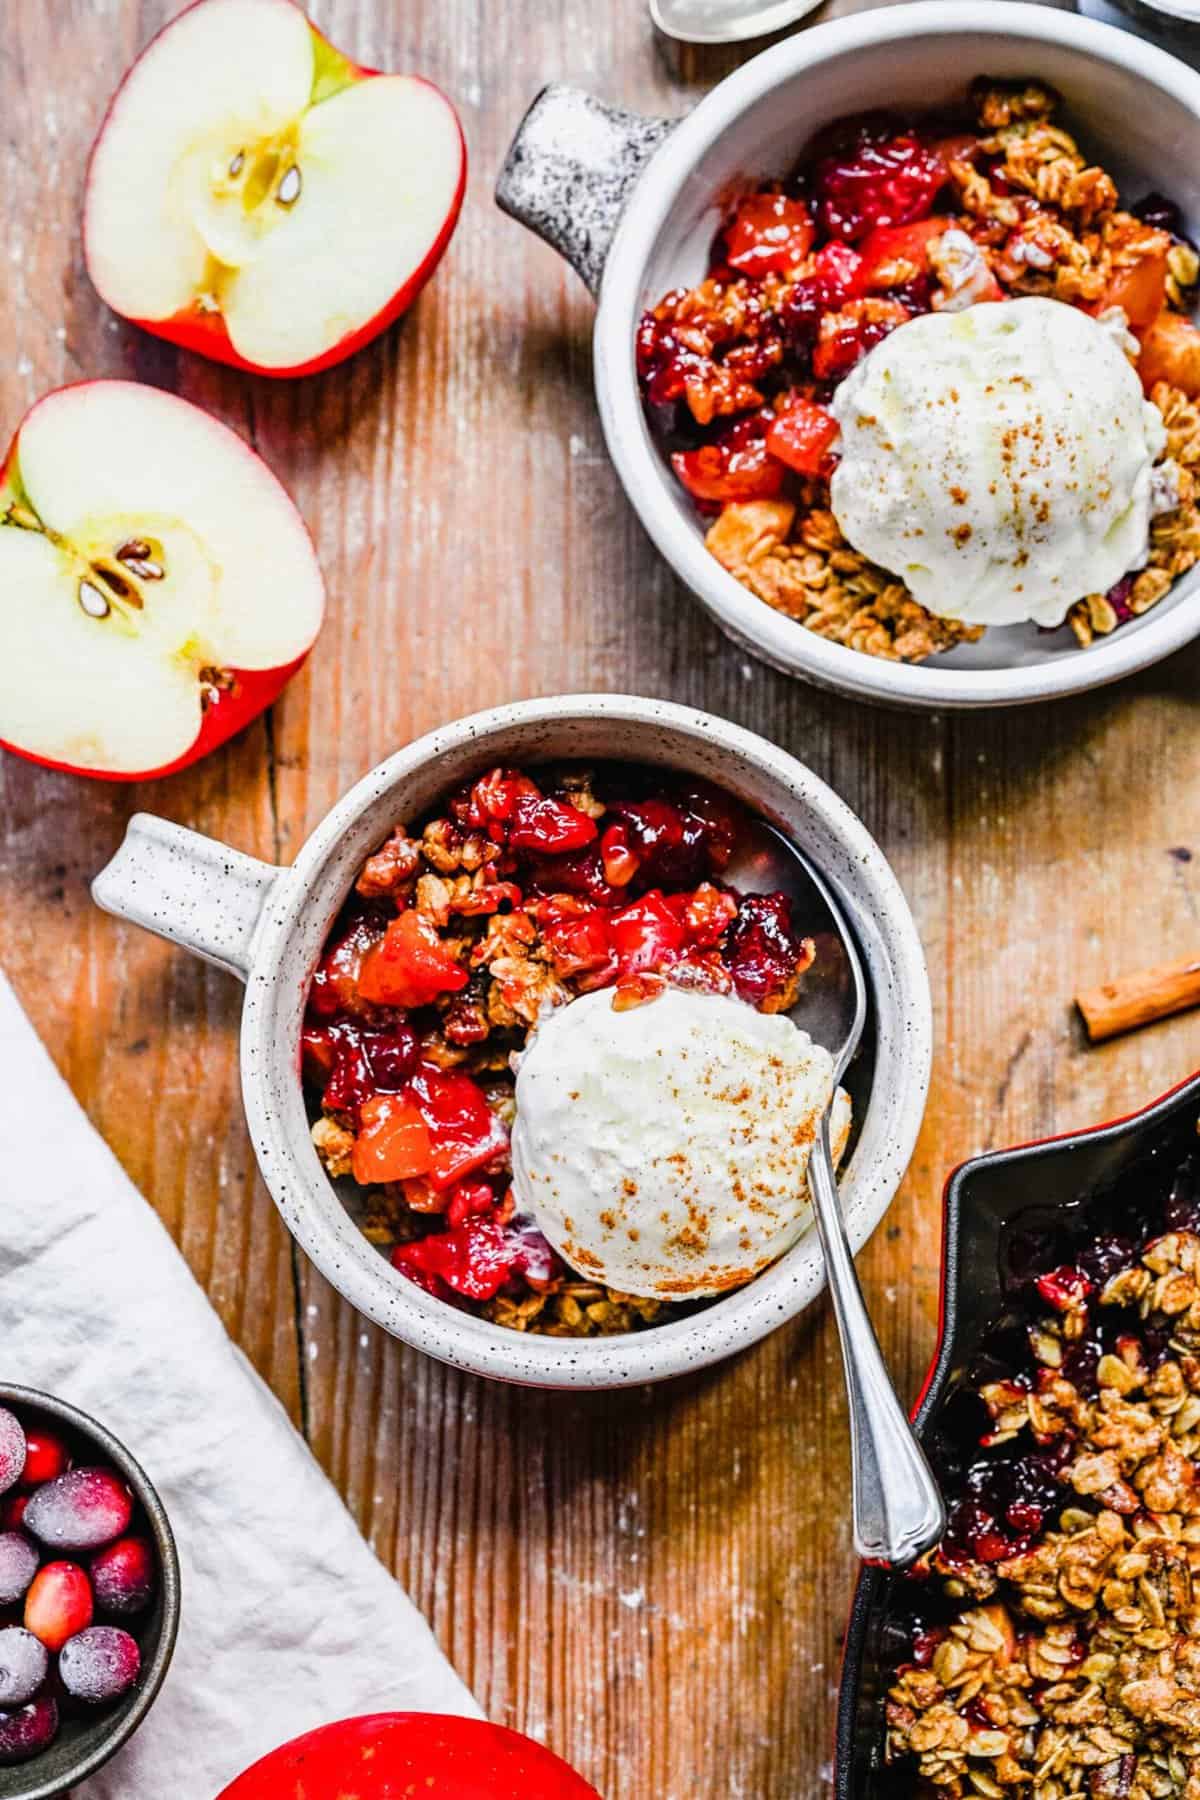 Several servings of apple cranberry crisp in white mugs with ice cream on top sit on a wooden surface. A halved apple sits next to the mugs of apple cranberry crisp.